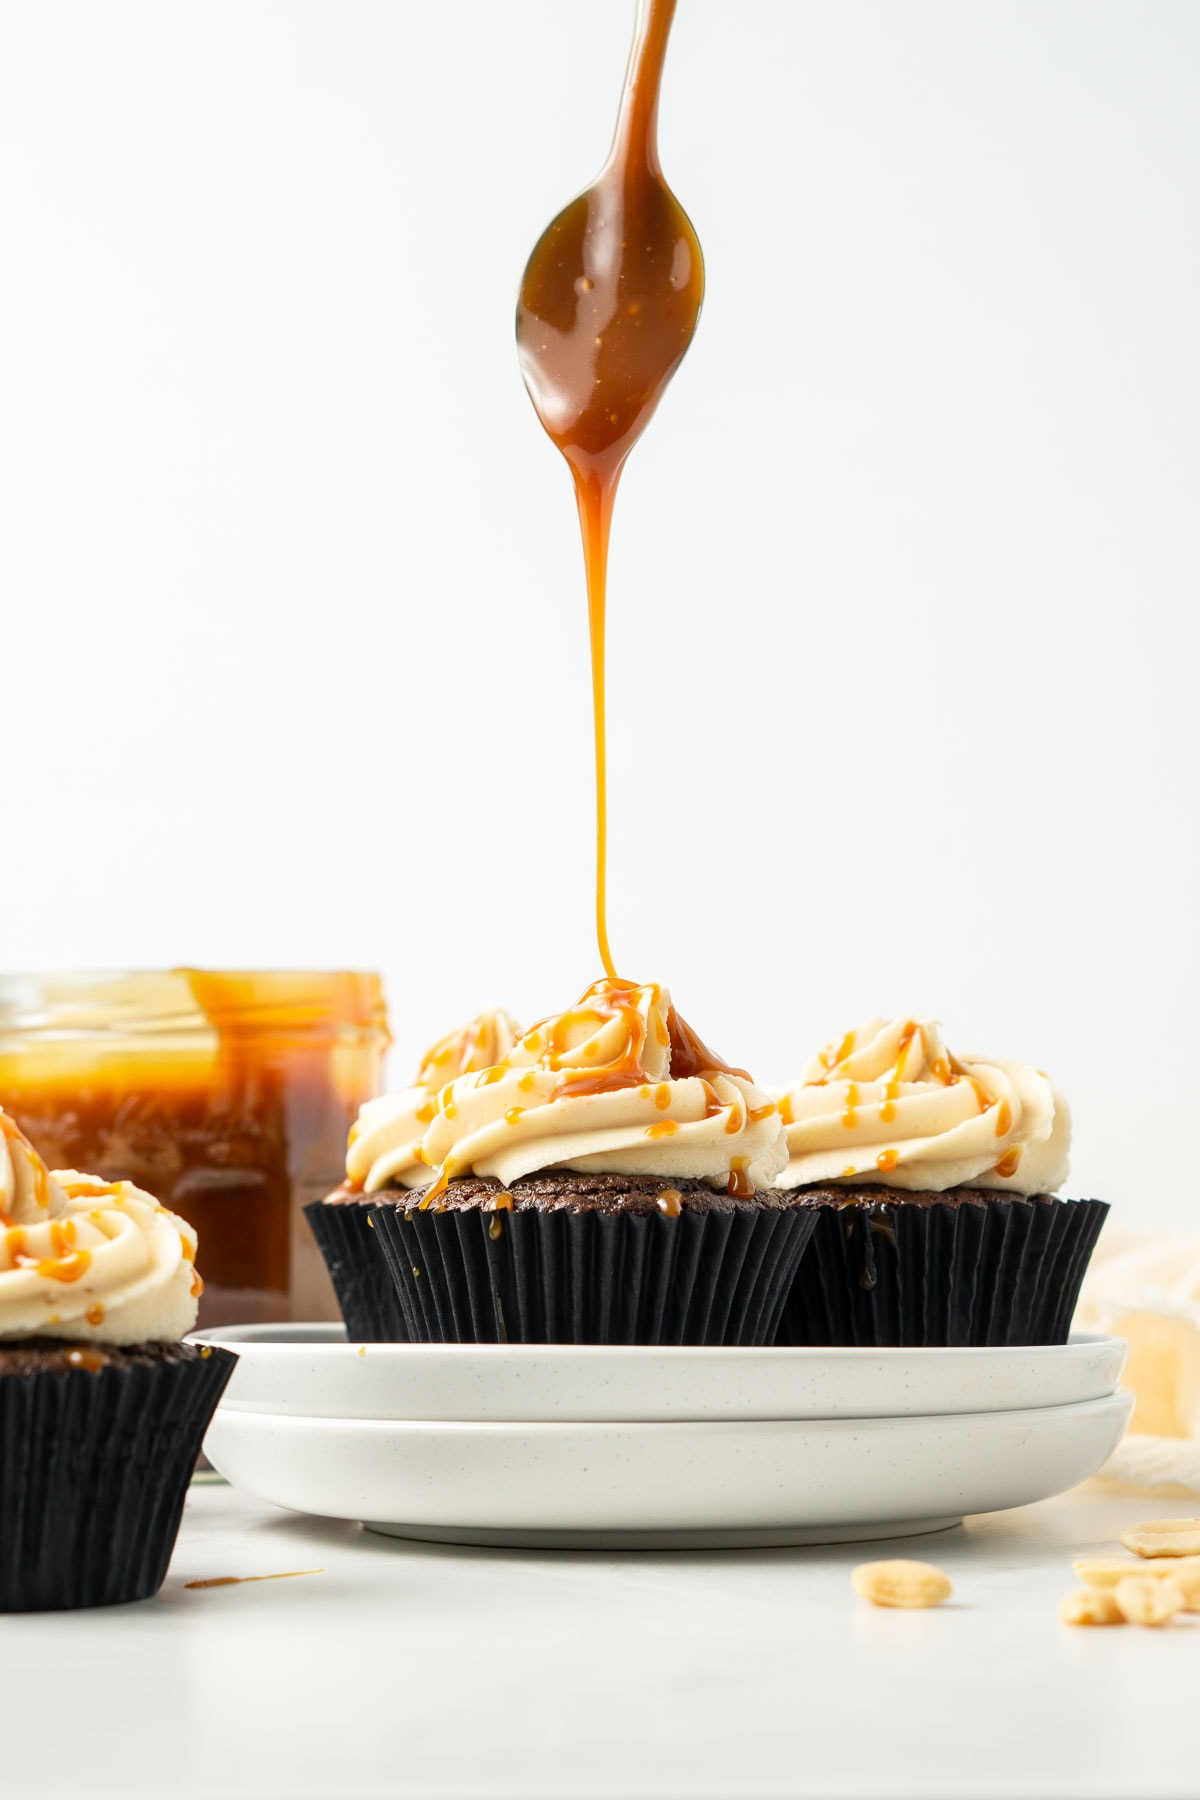 Large drizzle of caramel sauce on top of peanut butter frosted chocolate cupcakes.